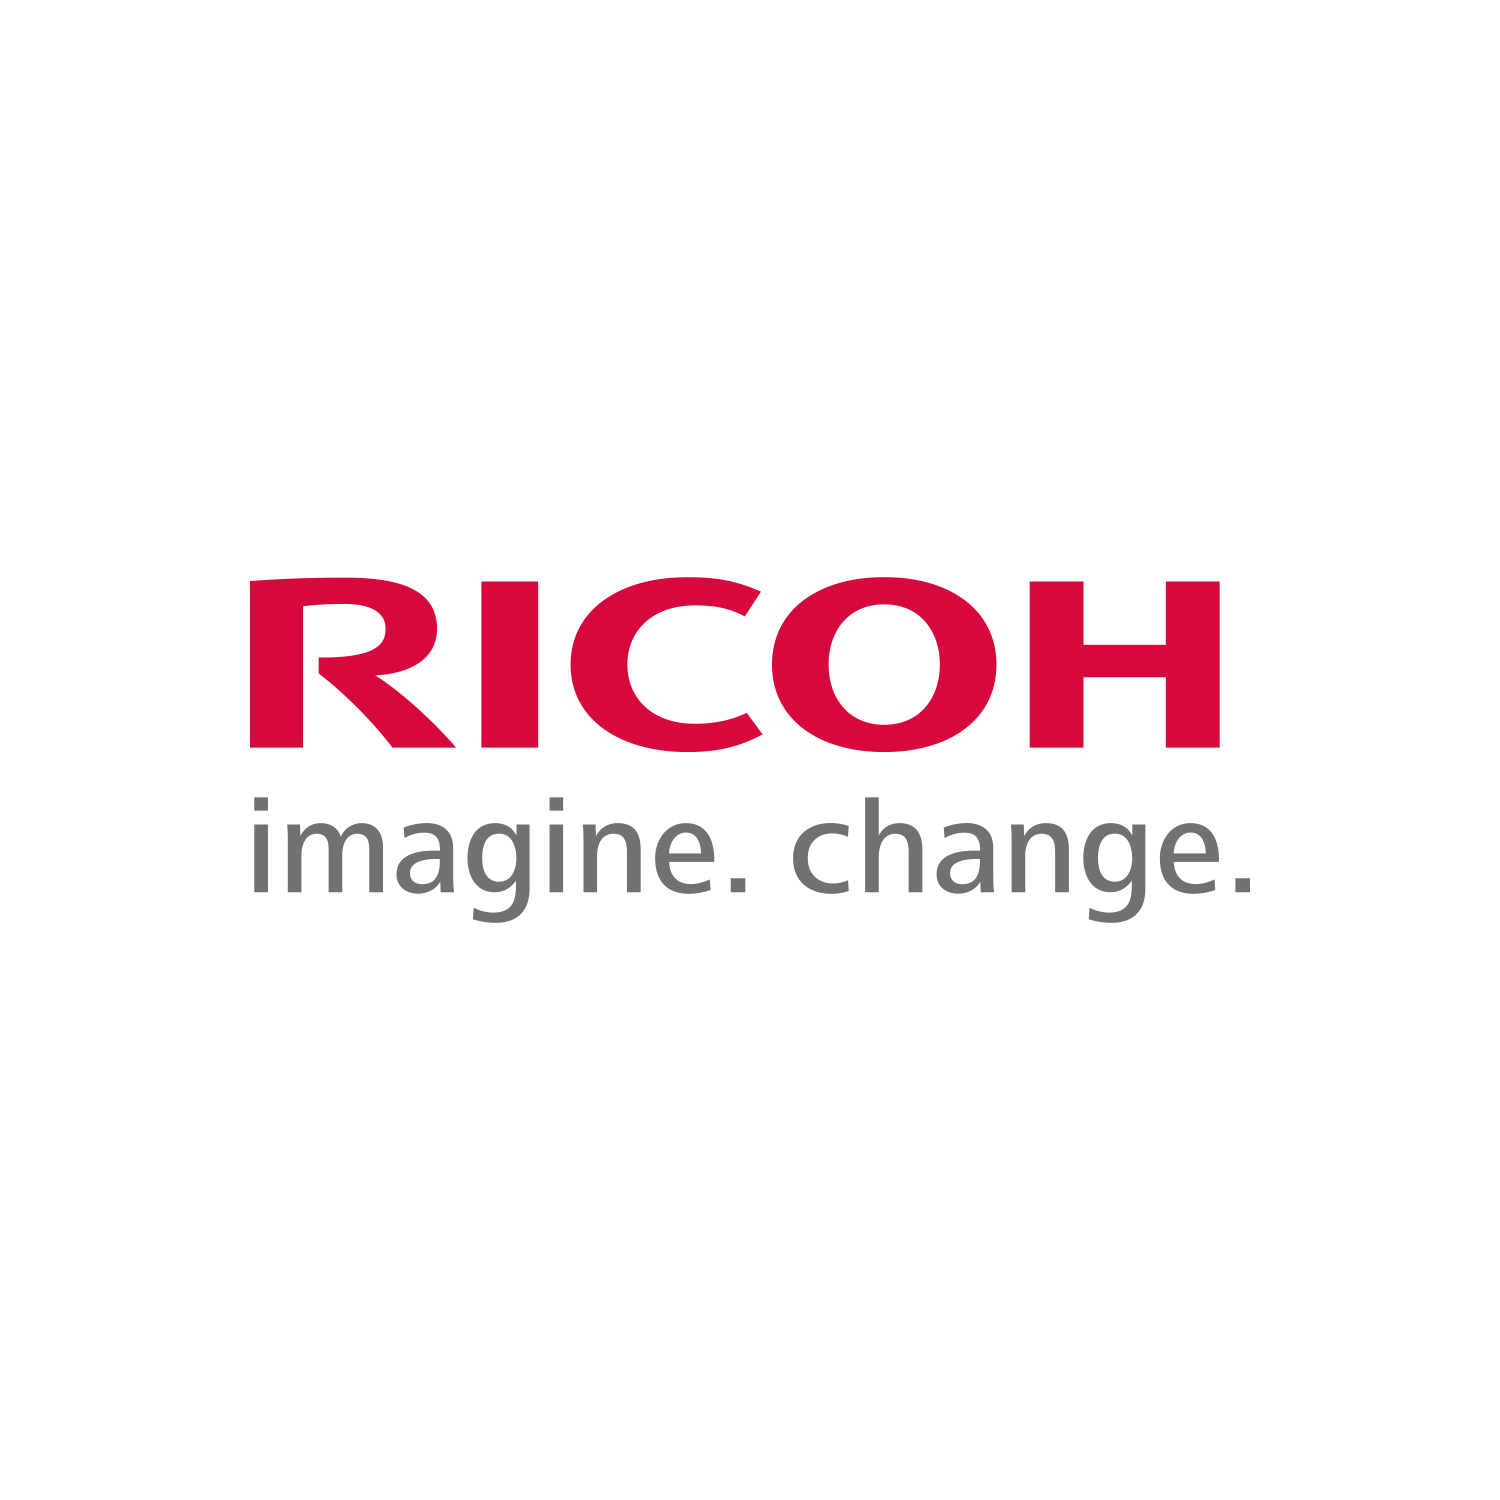 what is ricoh media driver v2.22.18.01 used for